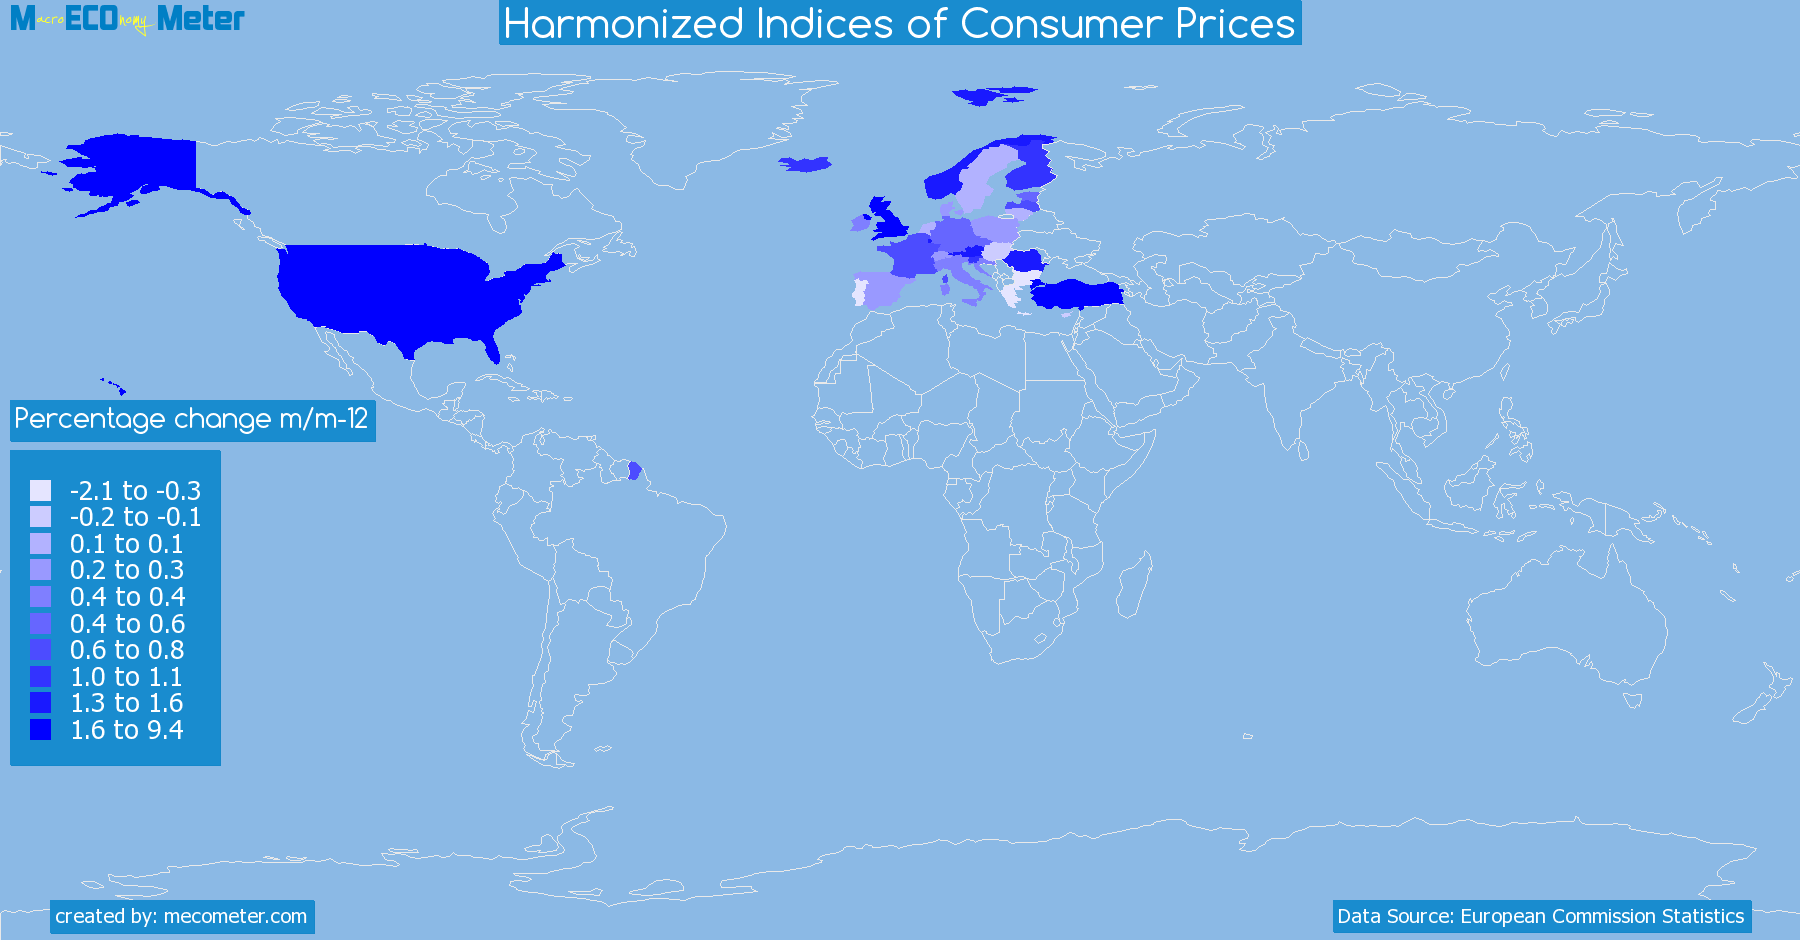 Worldmap of all countries colored to reflect the values of Harmonized Indices of Consumer Prices